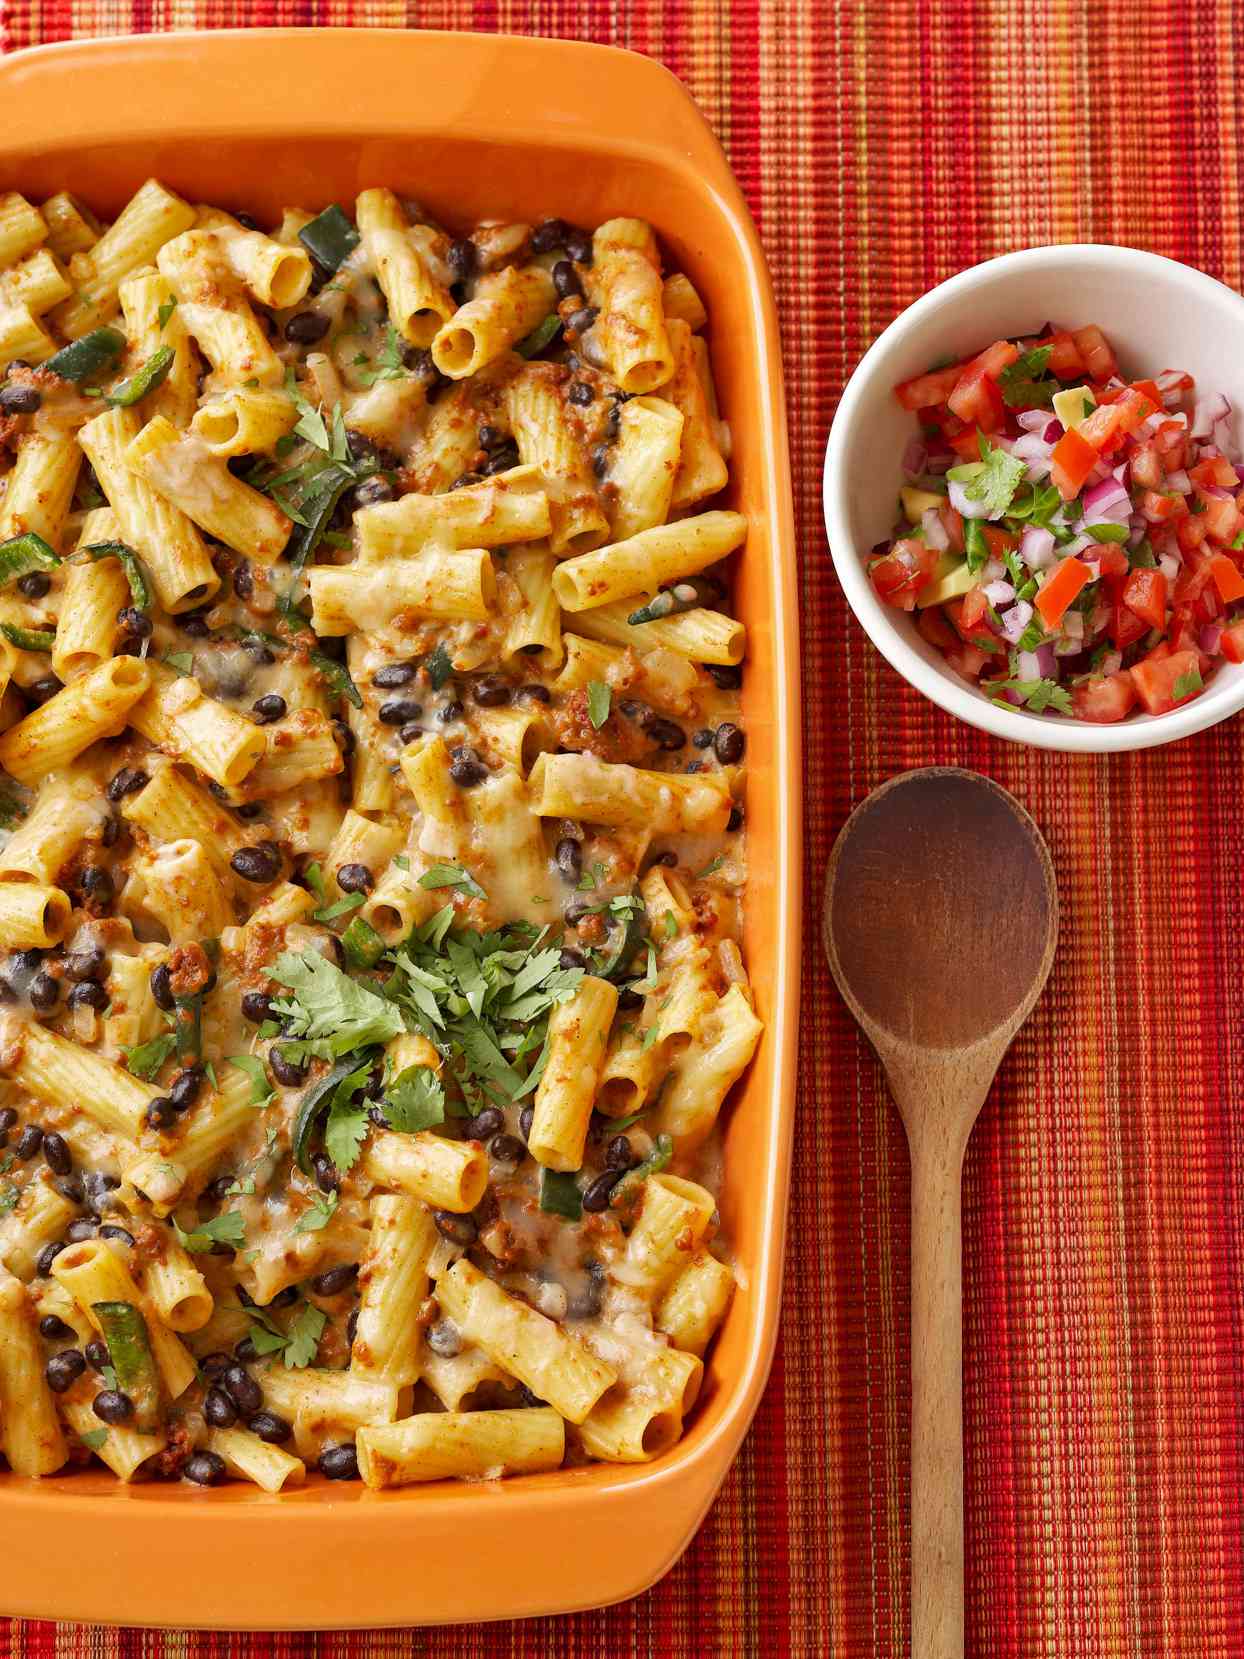 Mexican Rigatoni and Cheese